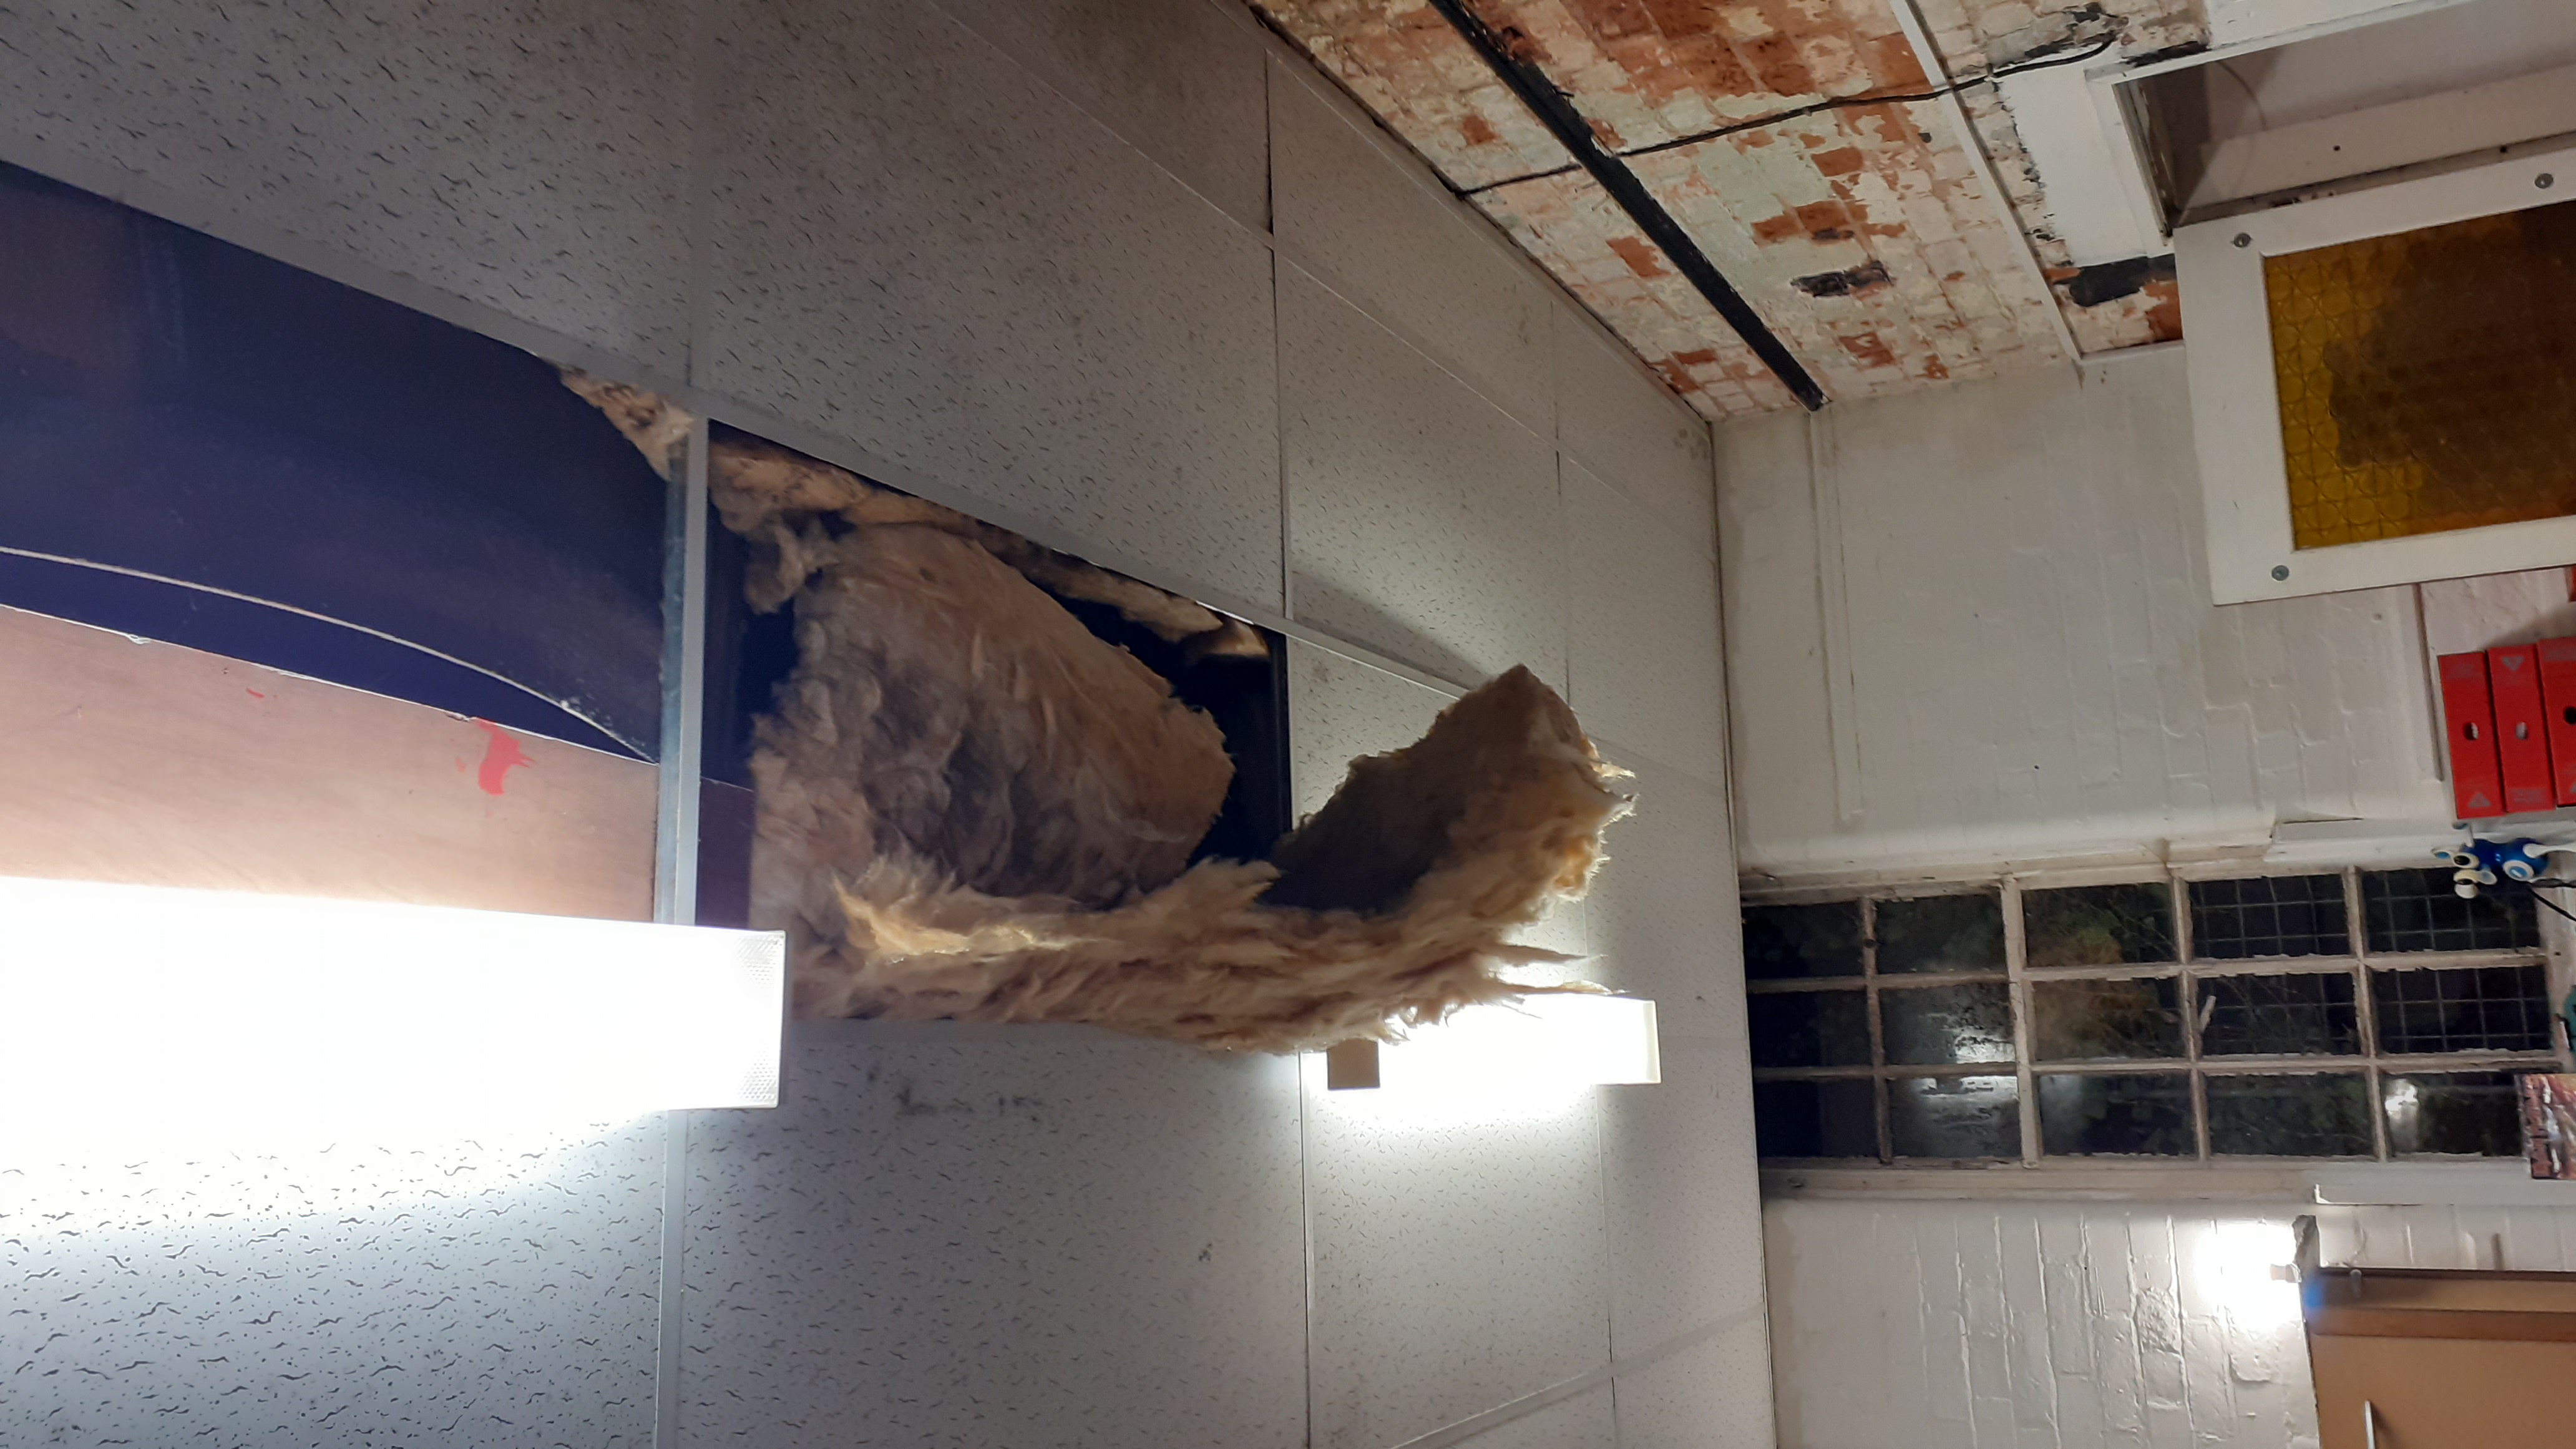 Missing celing tile with wet insulation hanging down